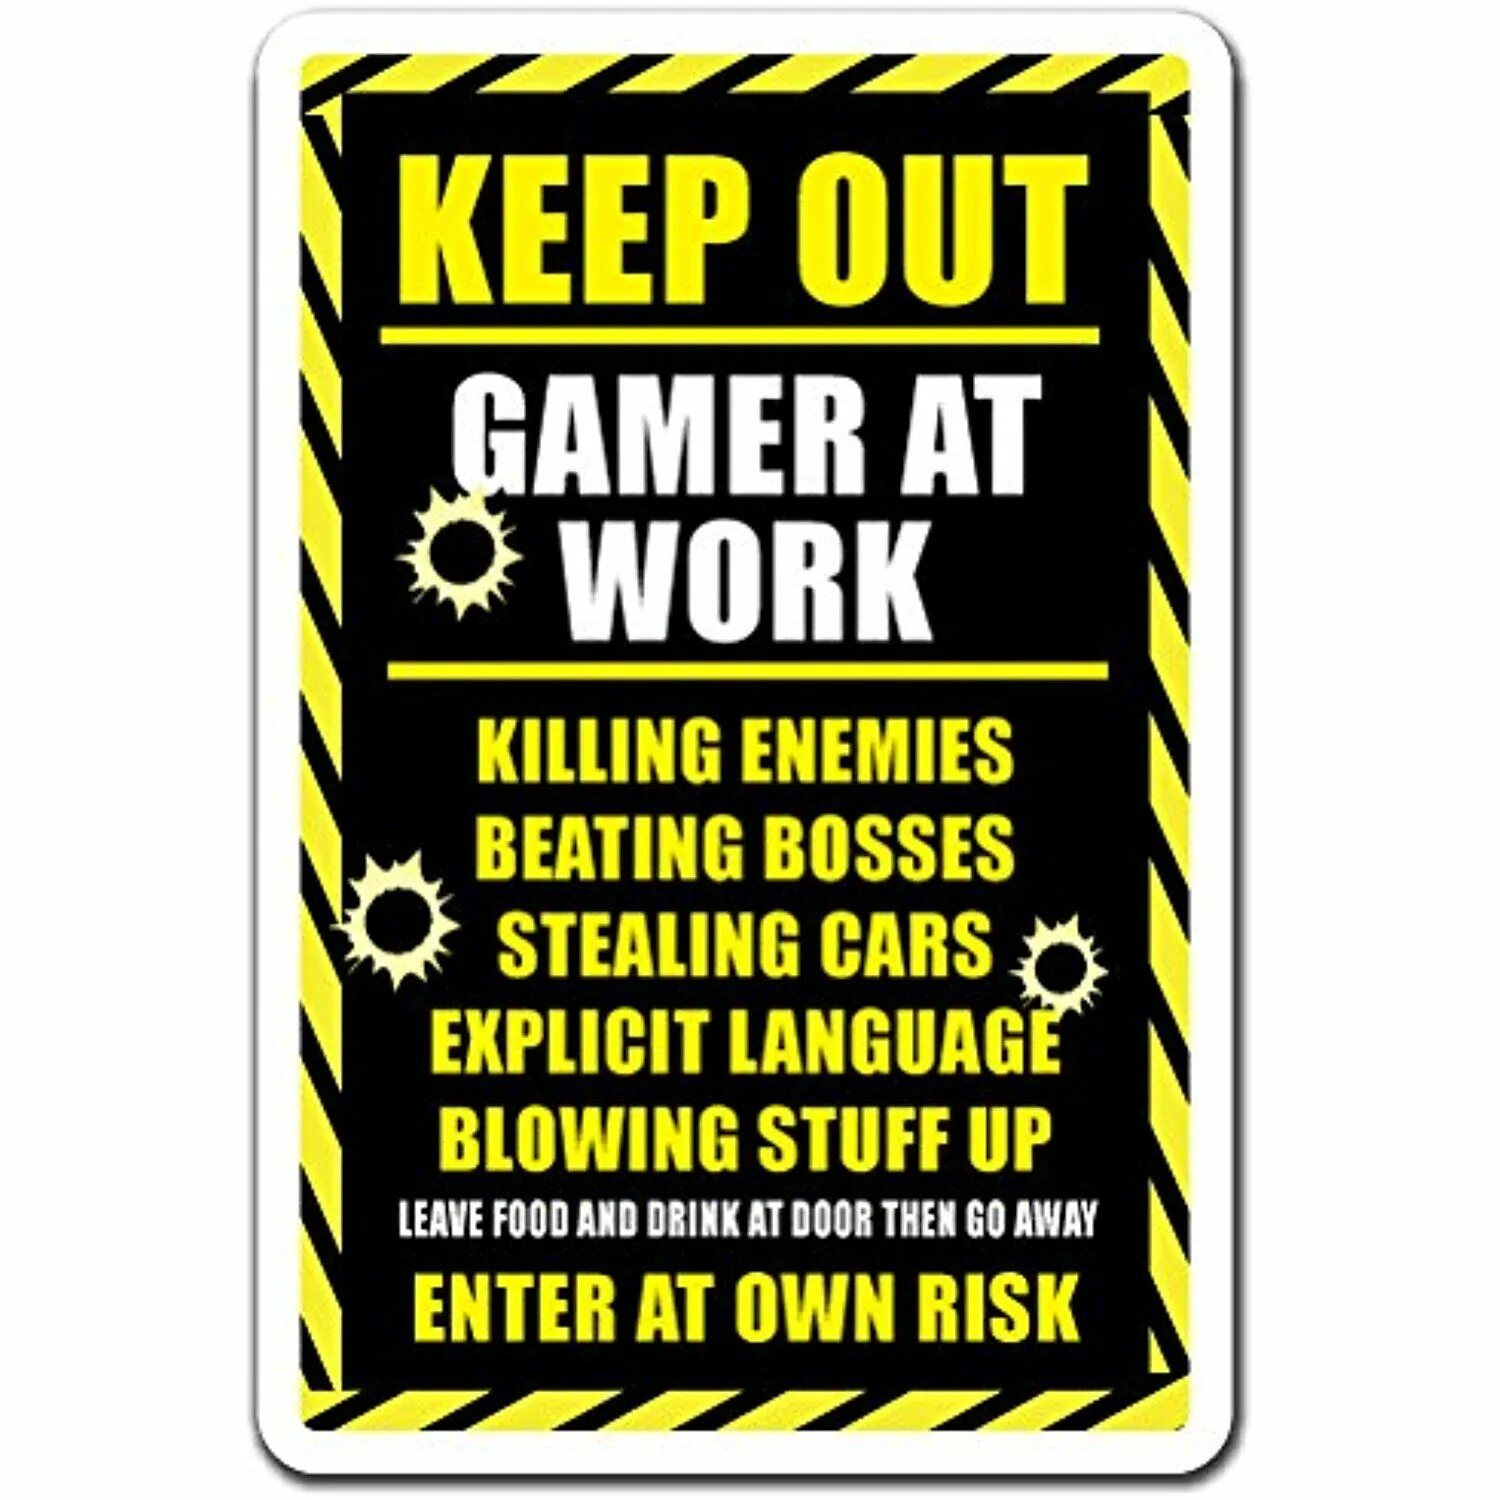 Kill work. Keep out Gamer at work. Keep out игра. Keep out картинка. Keep out плакат.